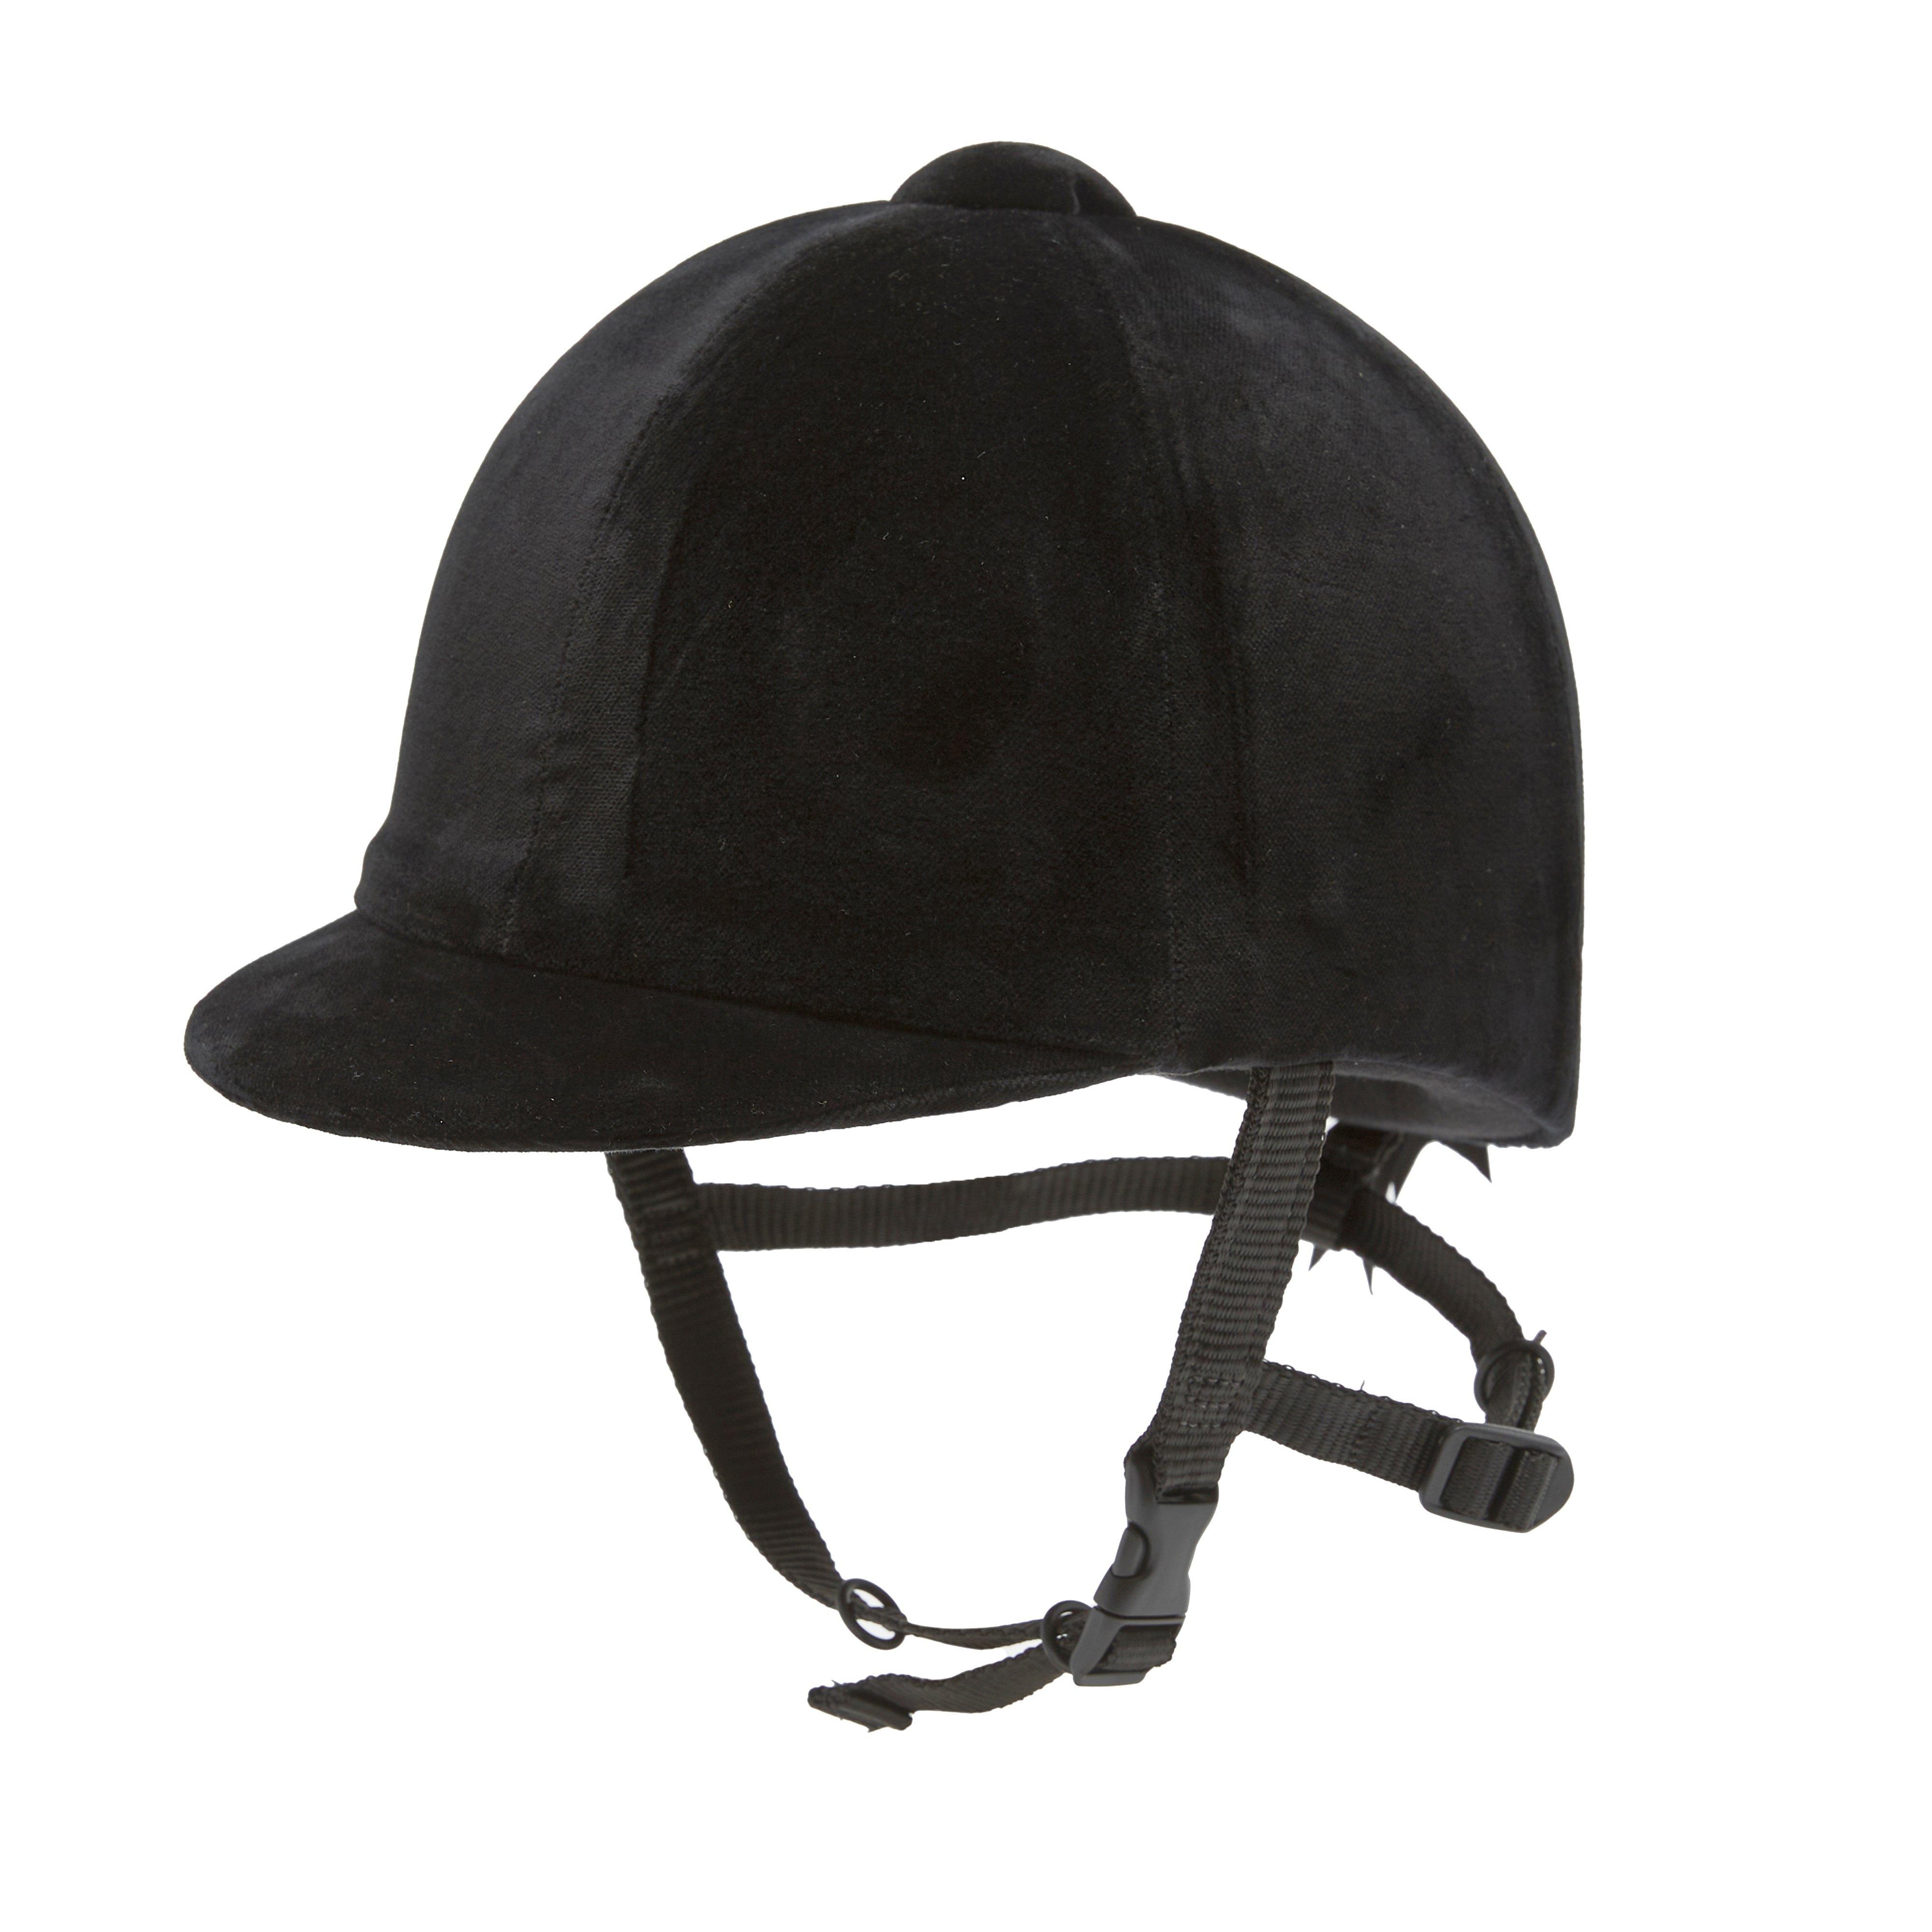 Adults CPX 3000 Riding Hat Black